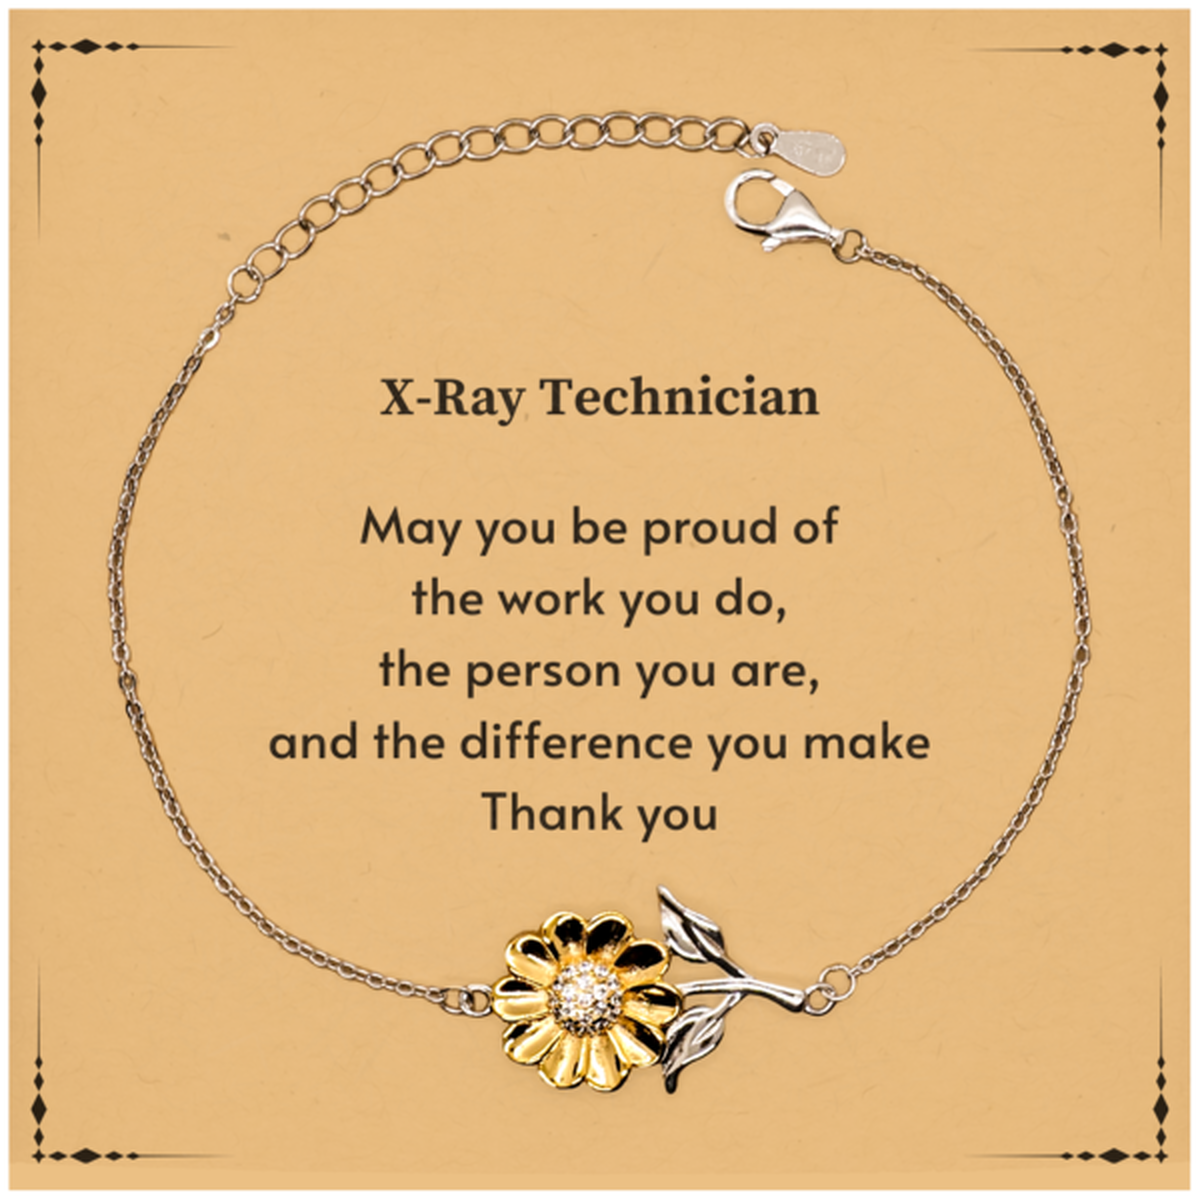 Heartwarming Sunflower Bracelet Retirement Coworkers Gifts for X-Ray Technician, X-Ray Technician May You be proud of the work you do, the person you are Gifts for Boss Men Women Friends